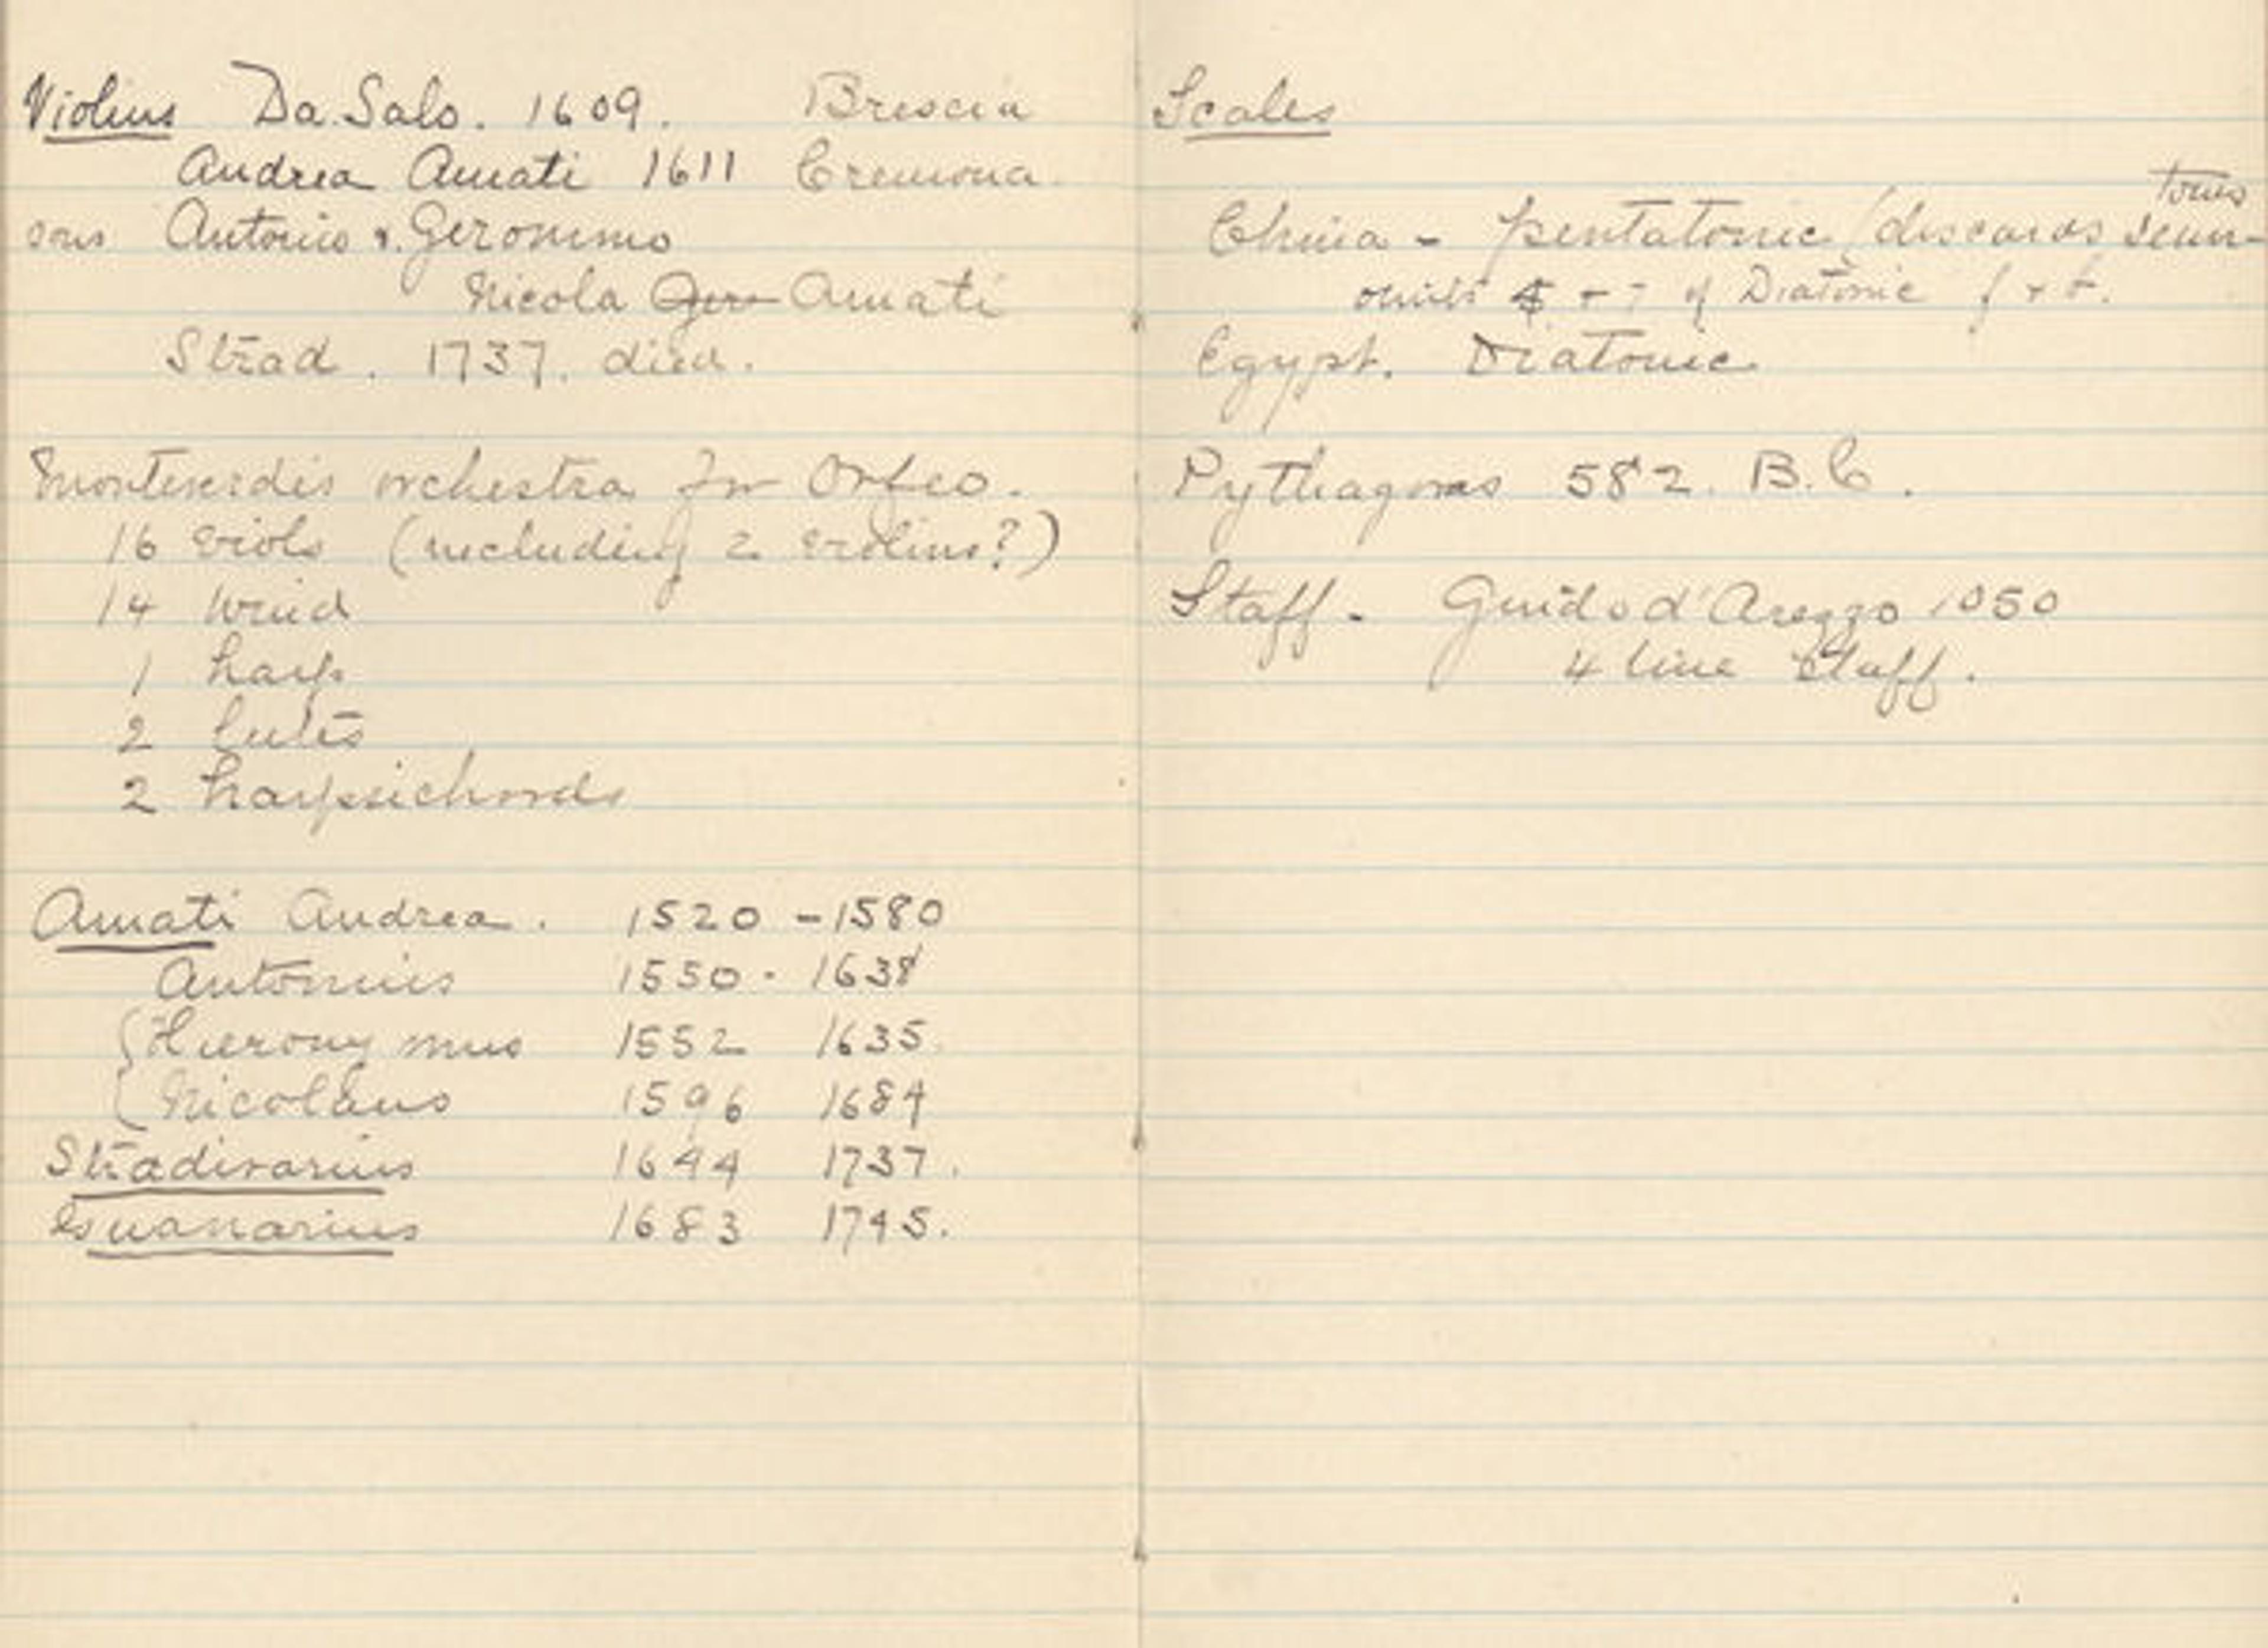 Frances Morris's notes on violins from her Music Lecture Notes notebook